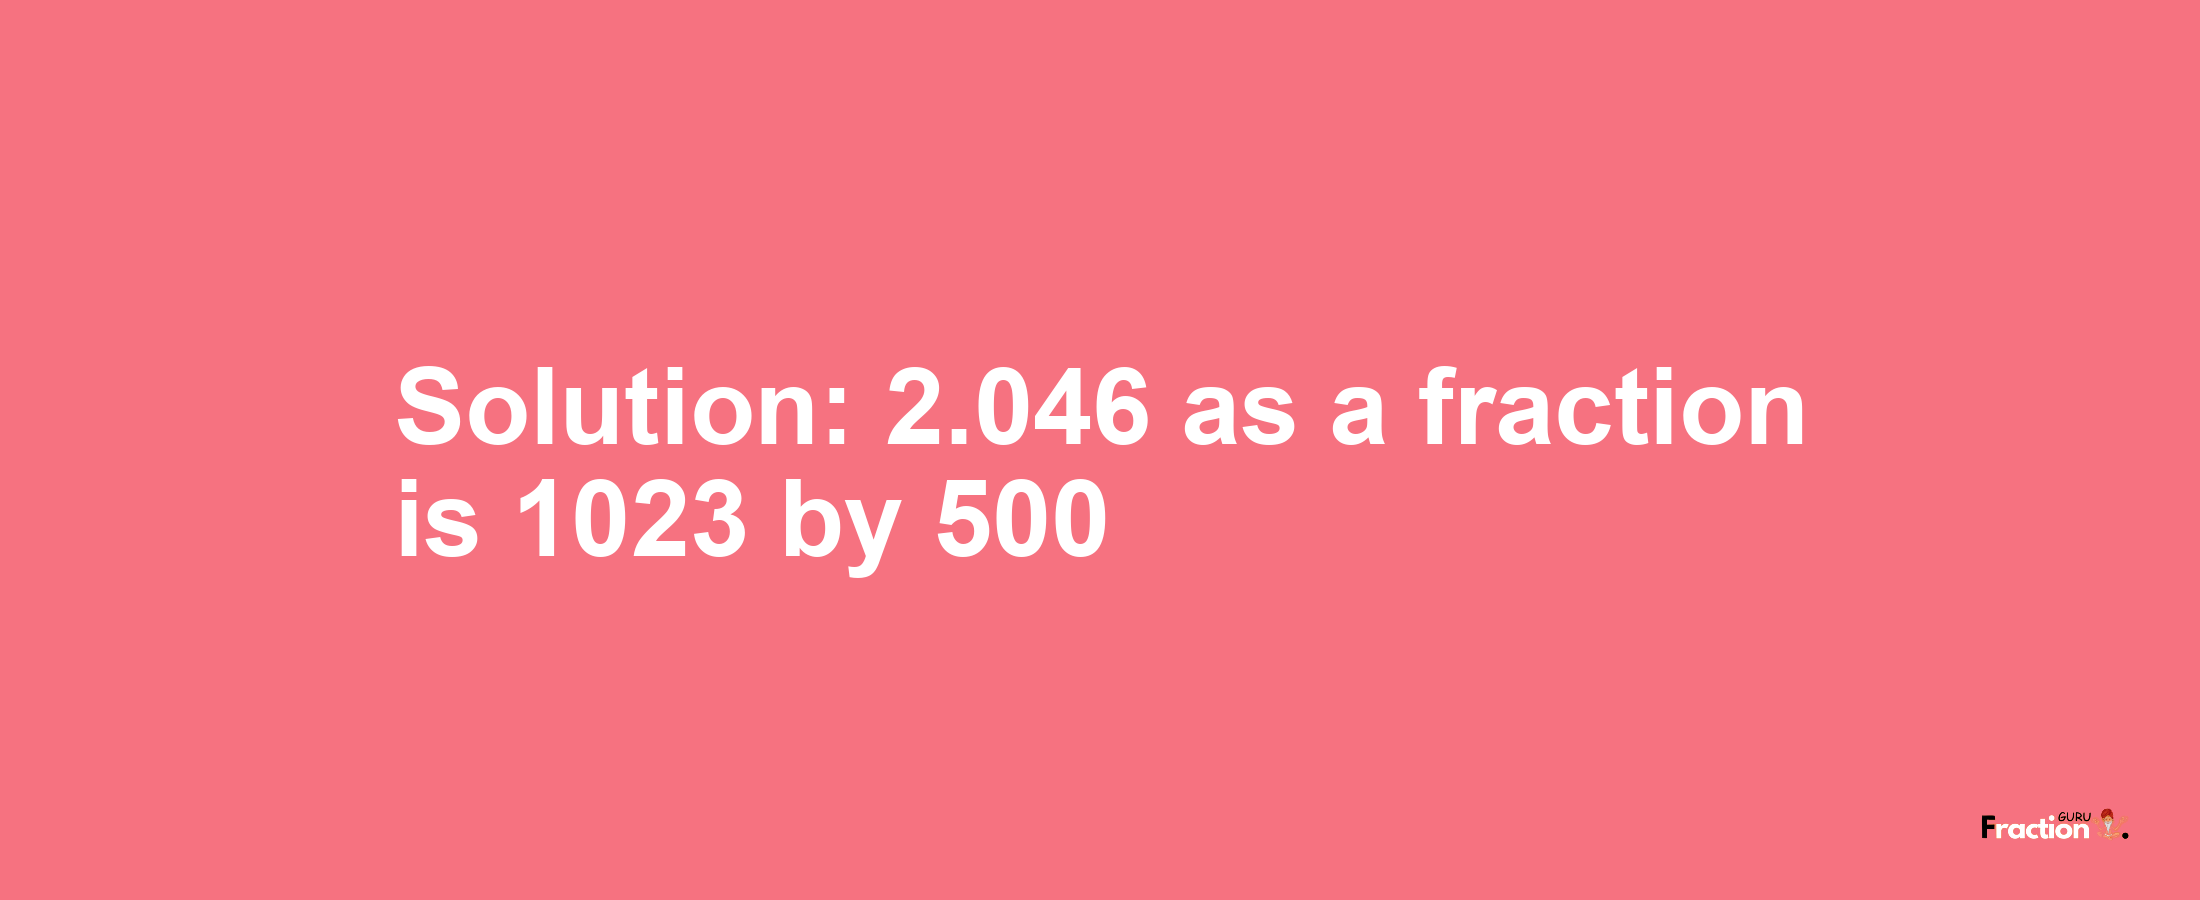 Solution:2.046 as a fraction is 1023/500